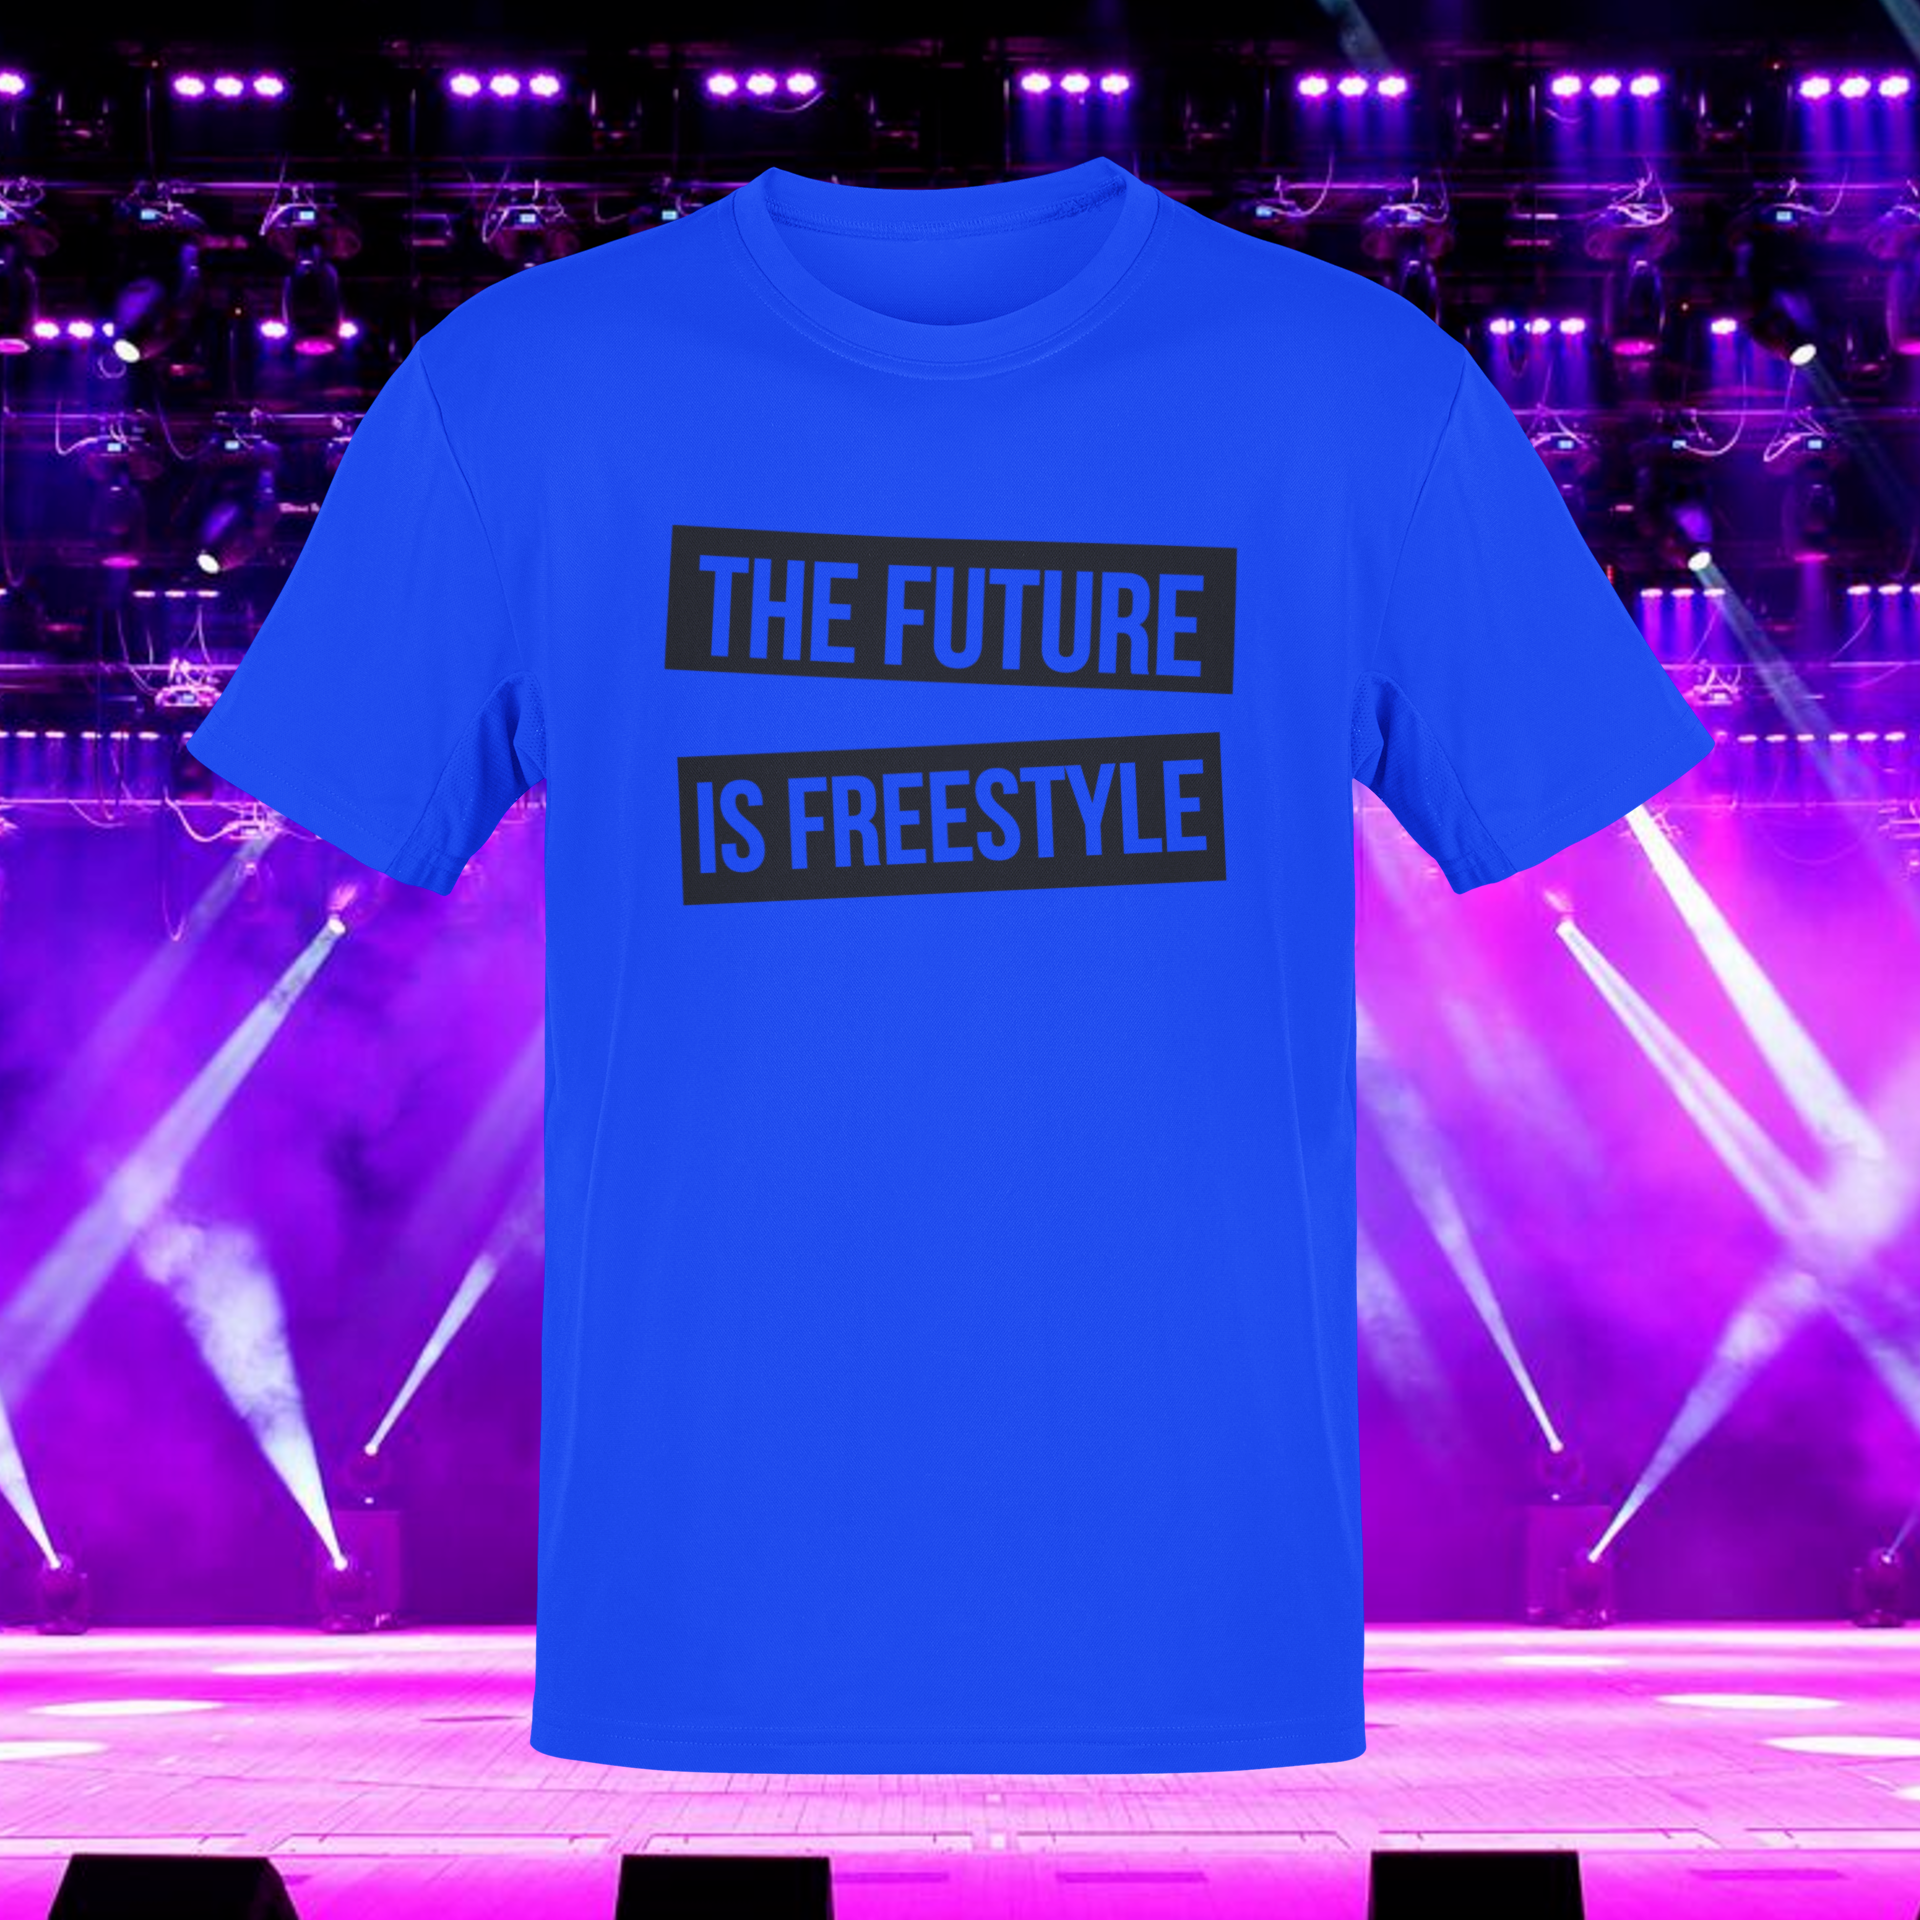 Brought to you by "TONY TKA” Freestyle Future Logo Tee.